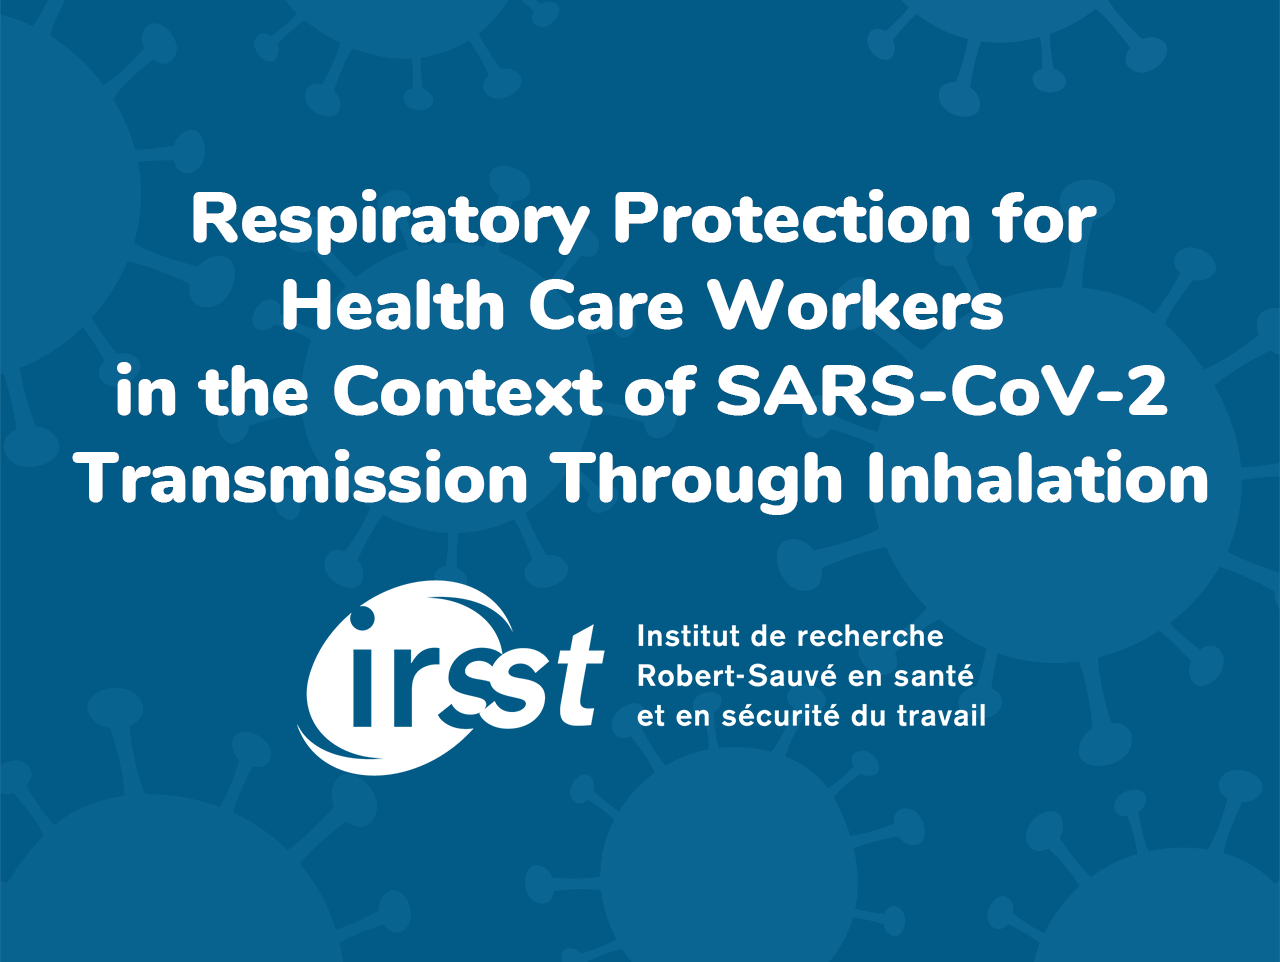 Respiratory Protection for Healthcare Workers in the Context of SARS-CoV-2 Transmission Through Inhalation